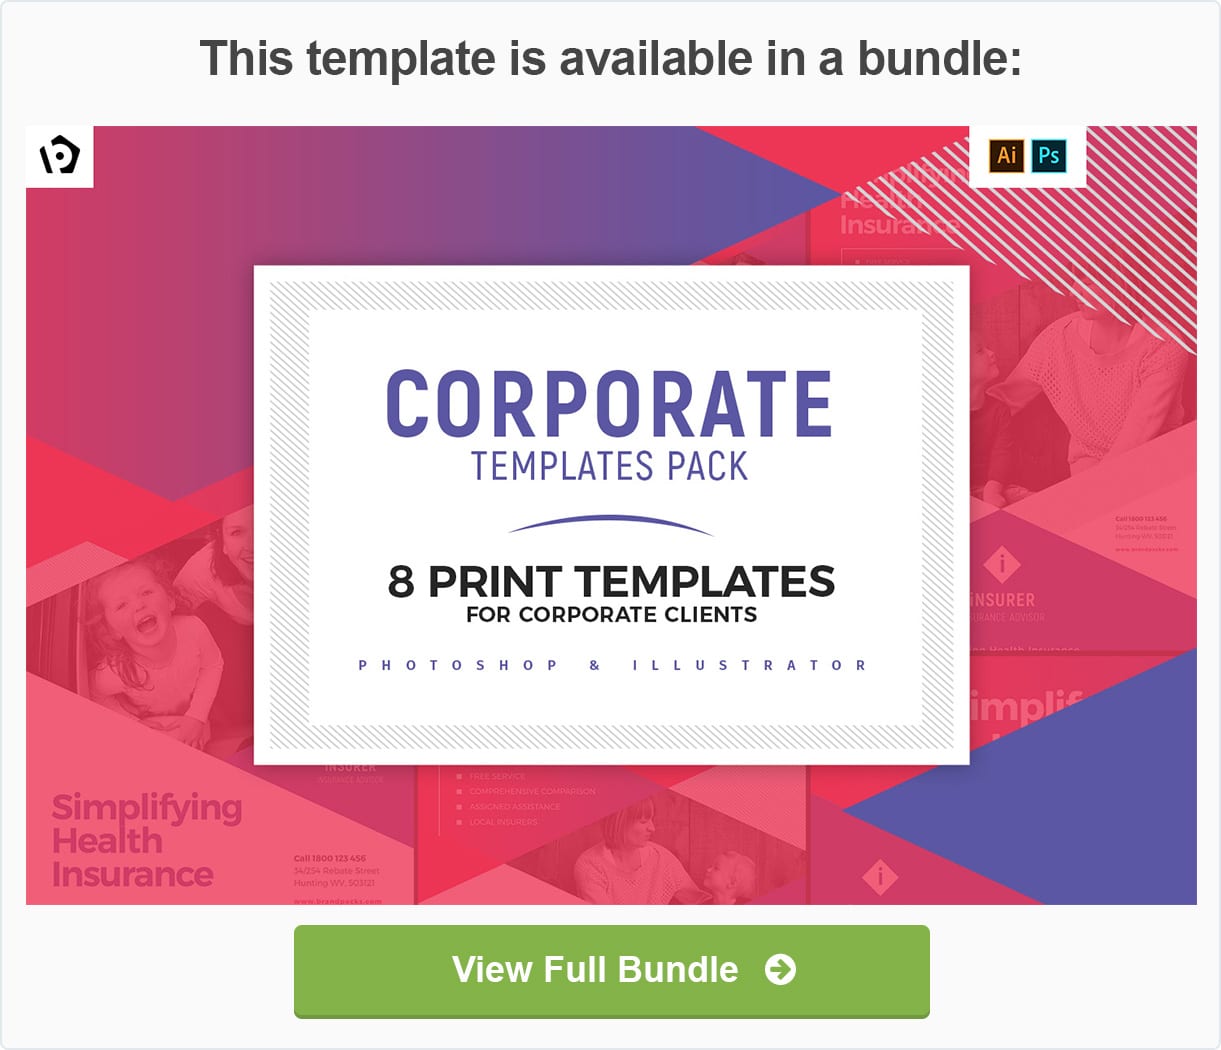 a3 powerpoint template